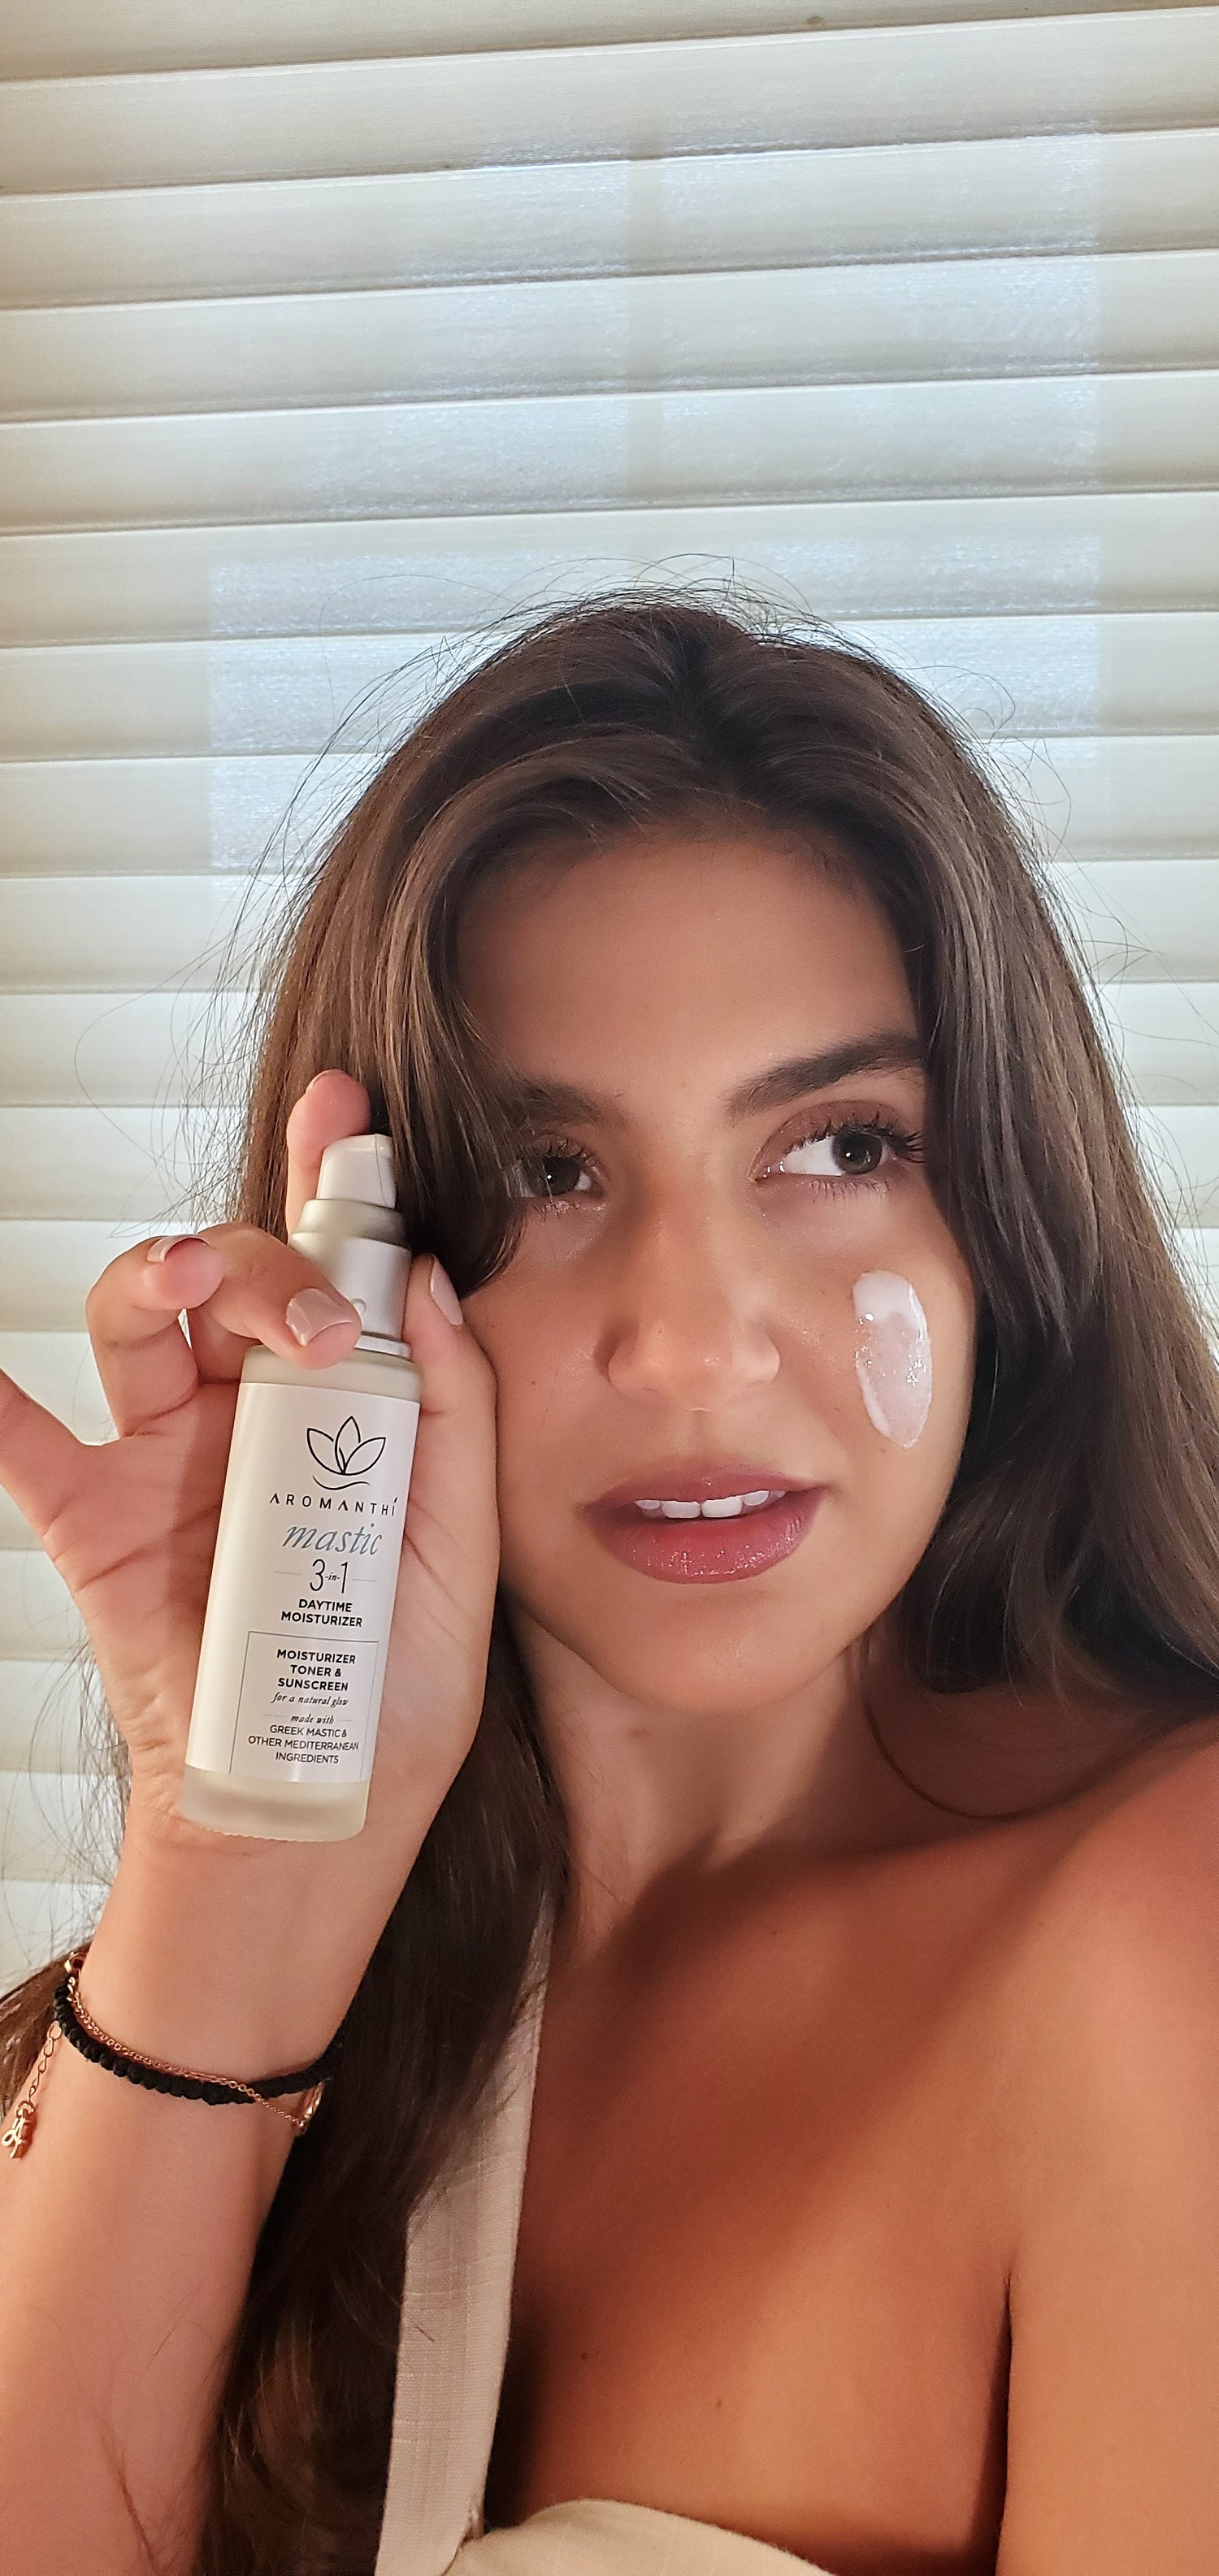 Aromanthi is a greek american brand that is woman owned and operated in west palm beach florida. Shop unique skincare products like the mastic aka mastiha daytime moisturizer. Aromatherapy face moisturizer with zinc oxide.